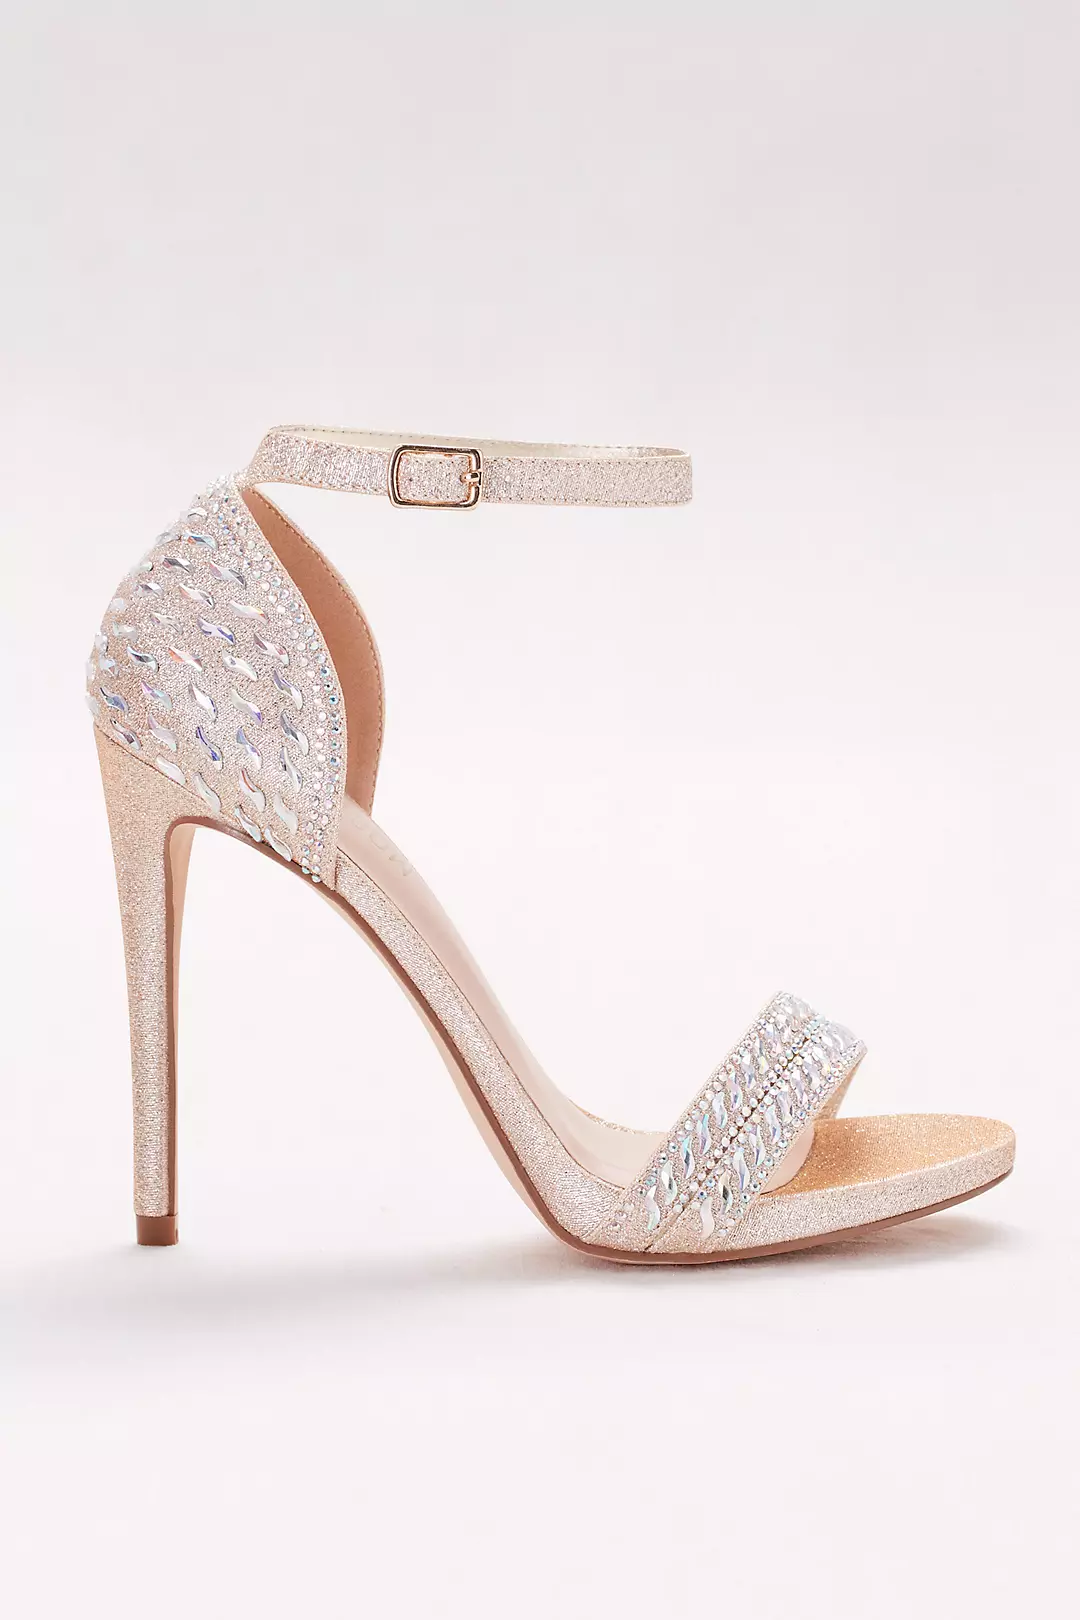 Metallic Ankle-Strap Sandals with Iridescent Gems Image 3